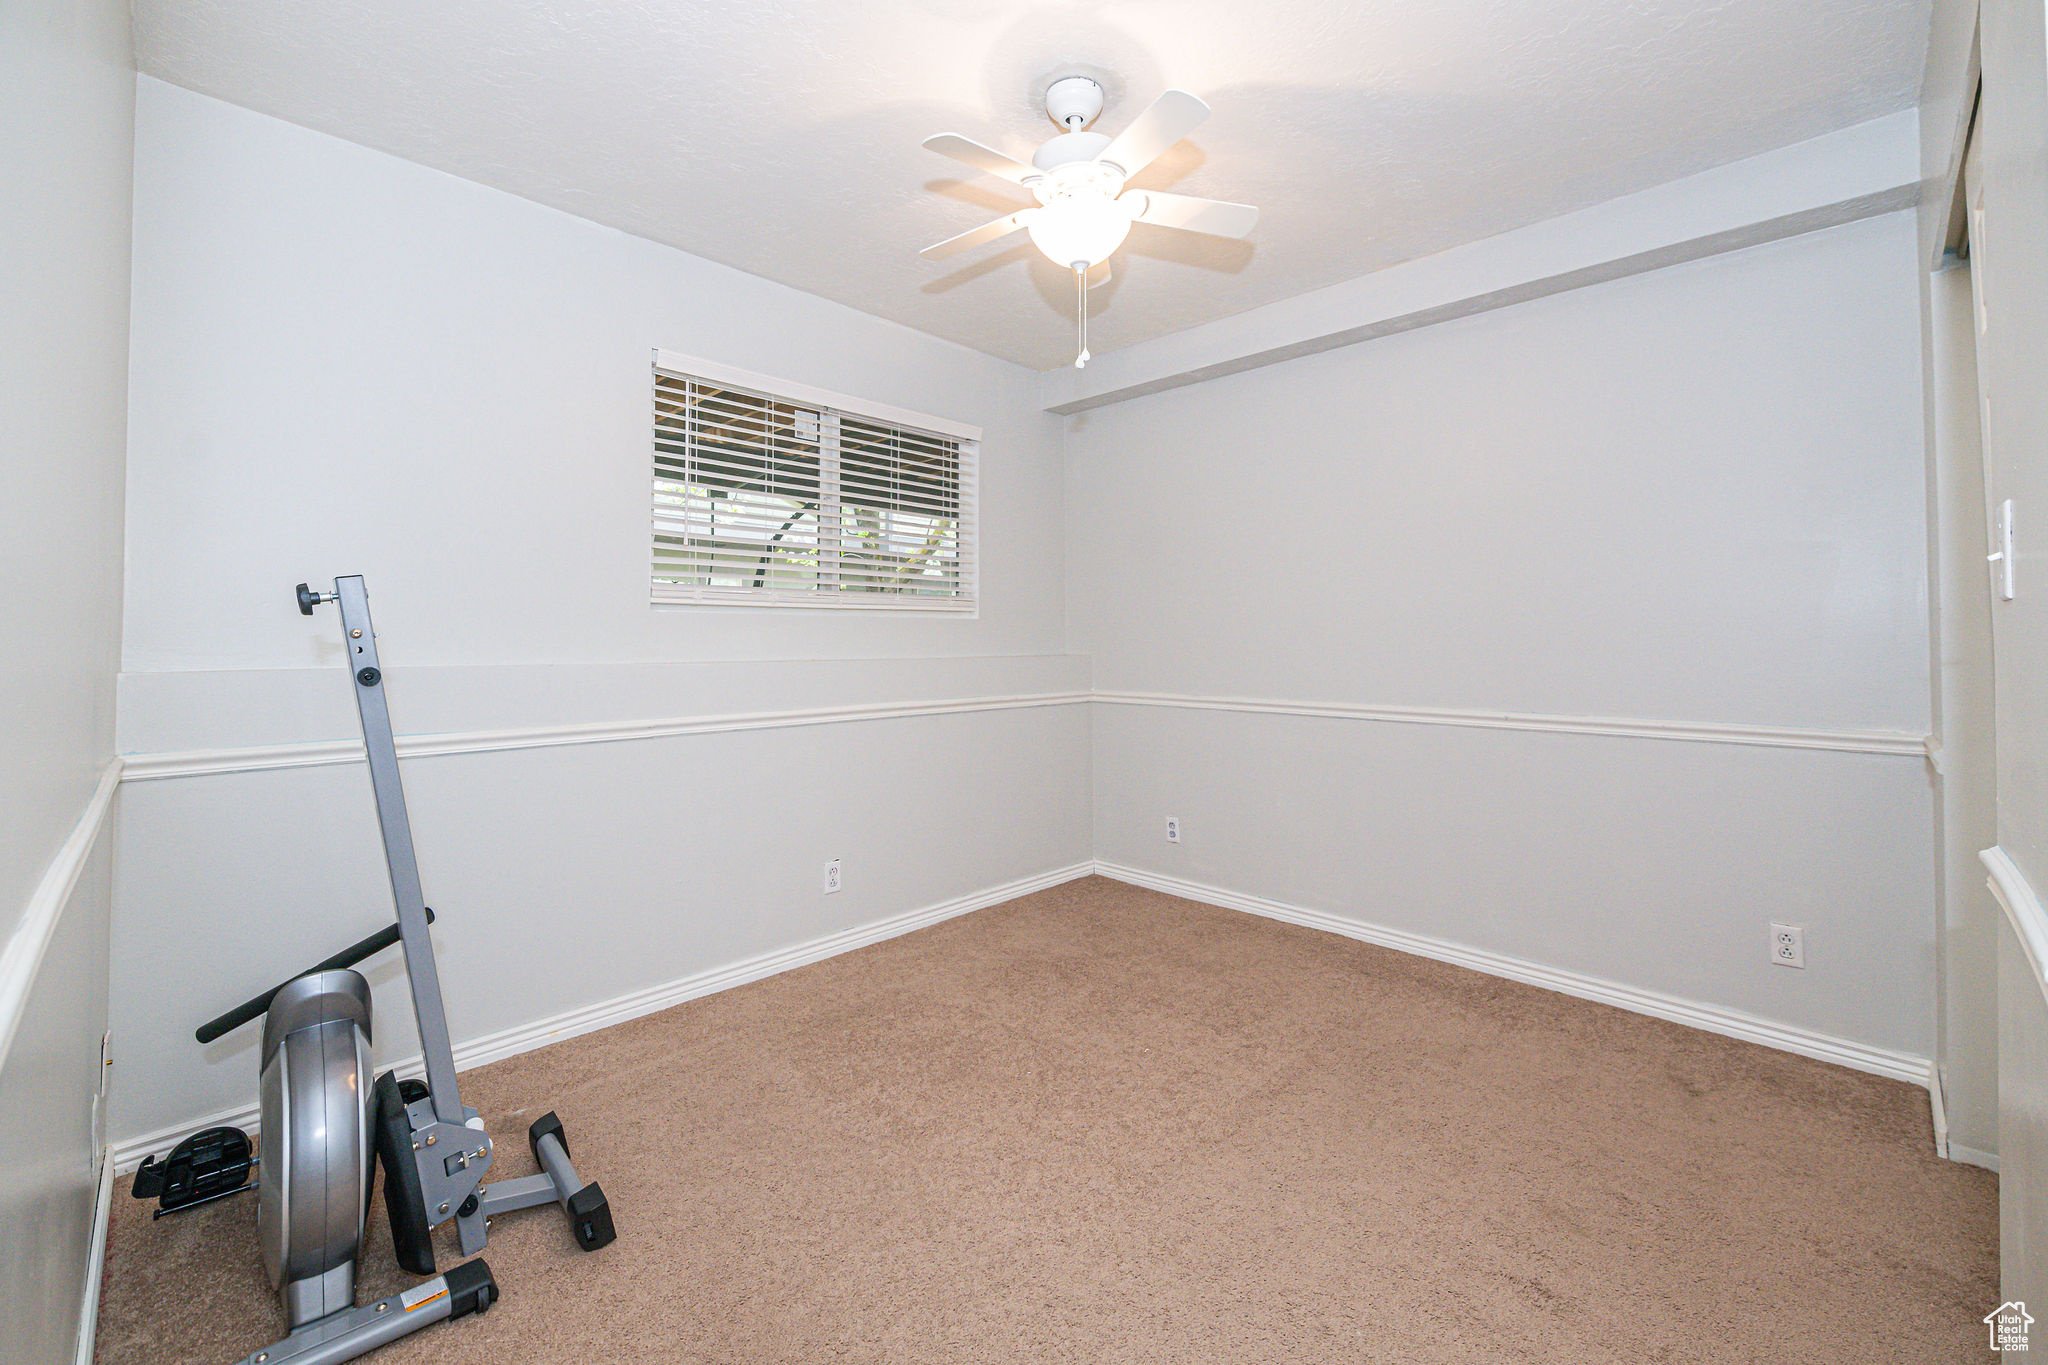 Workout room featuring light carpet and ceiling fan